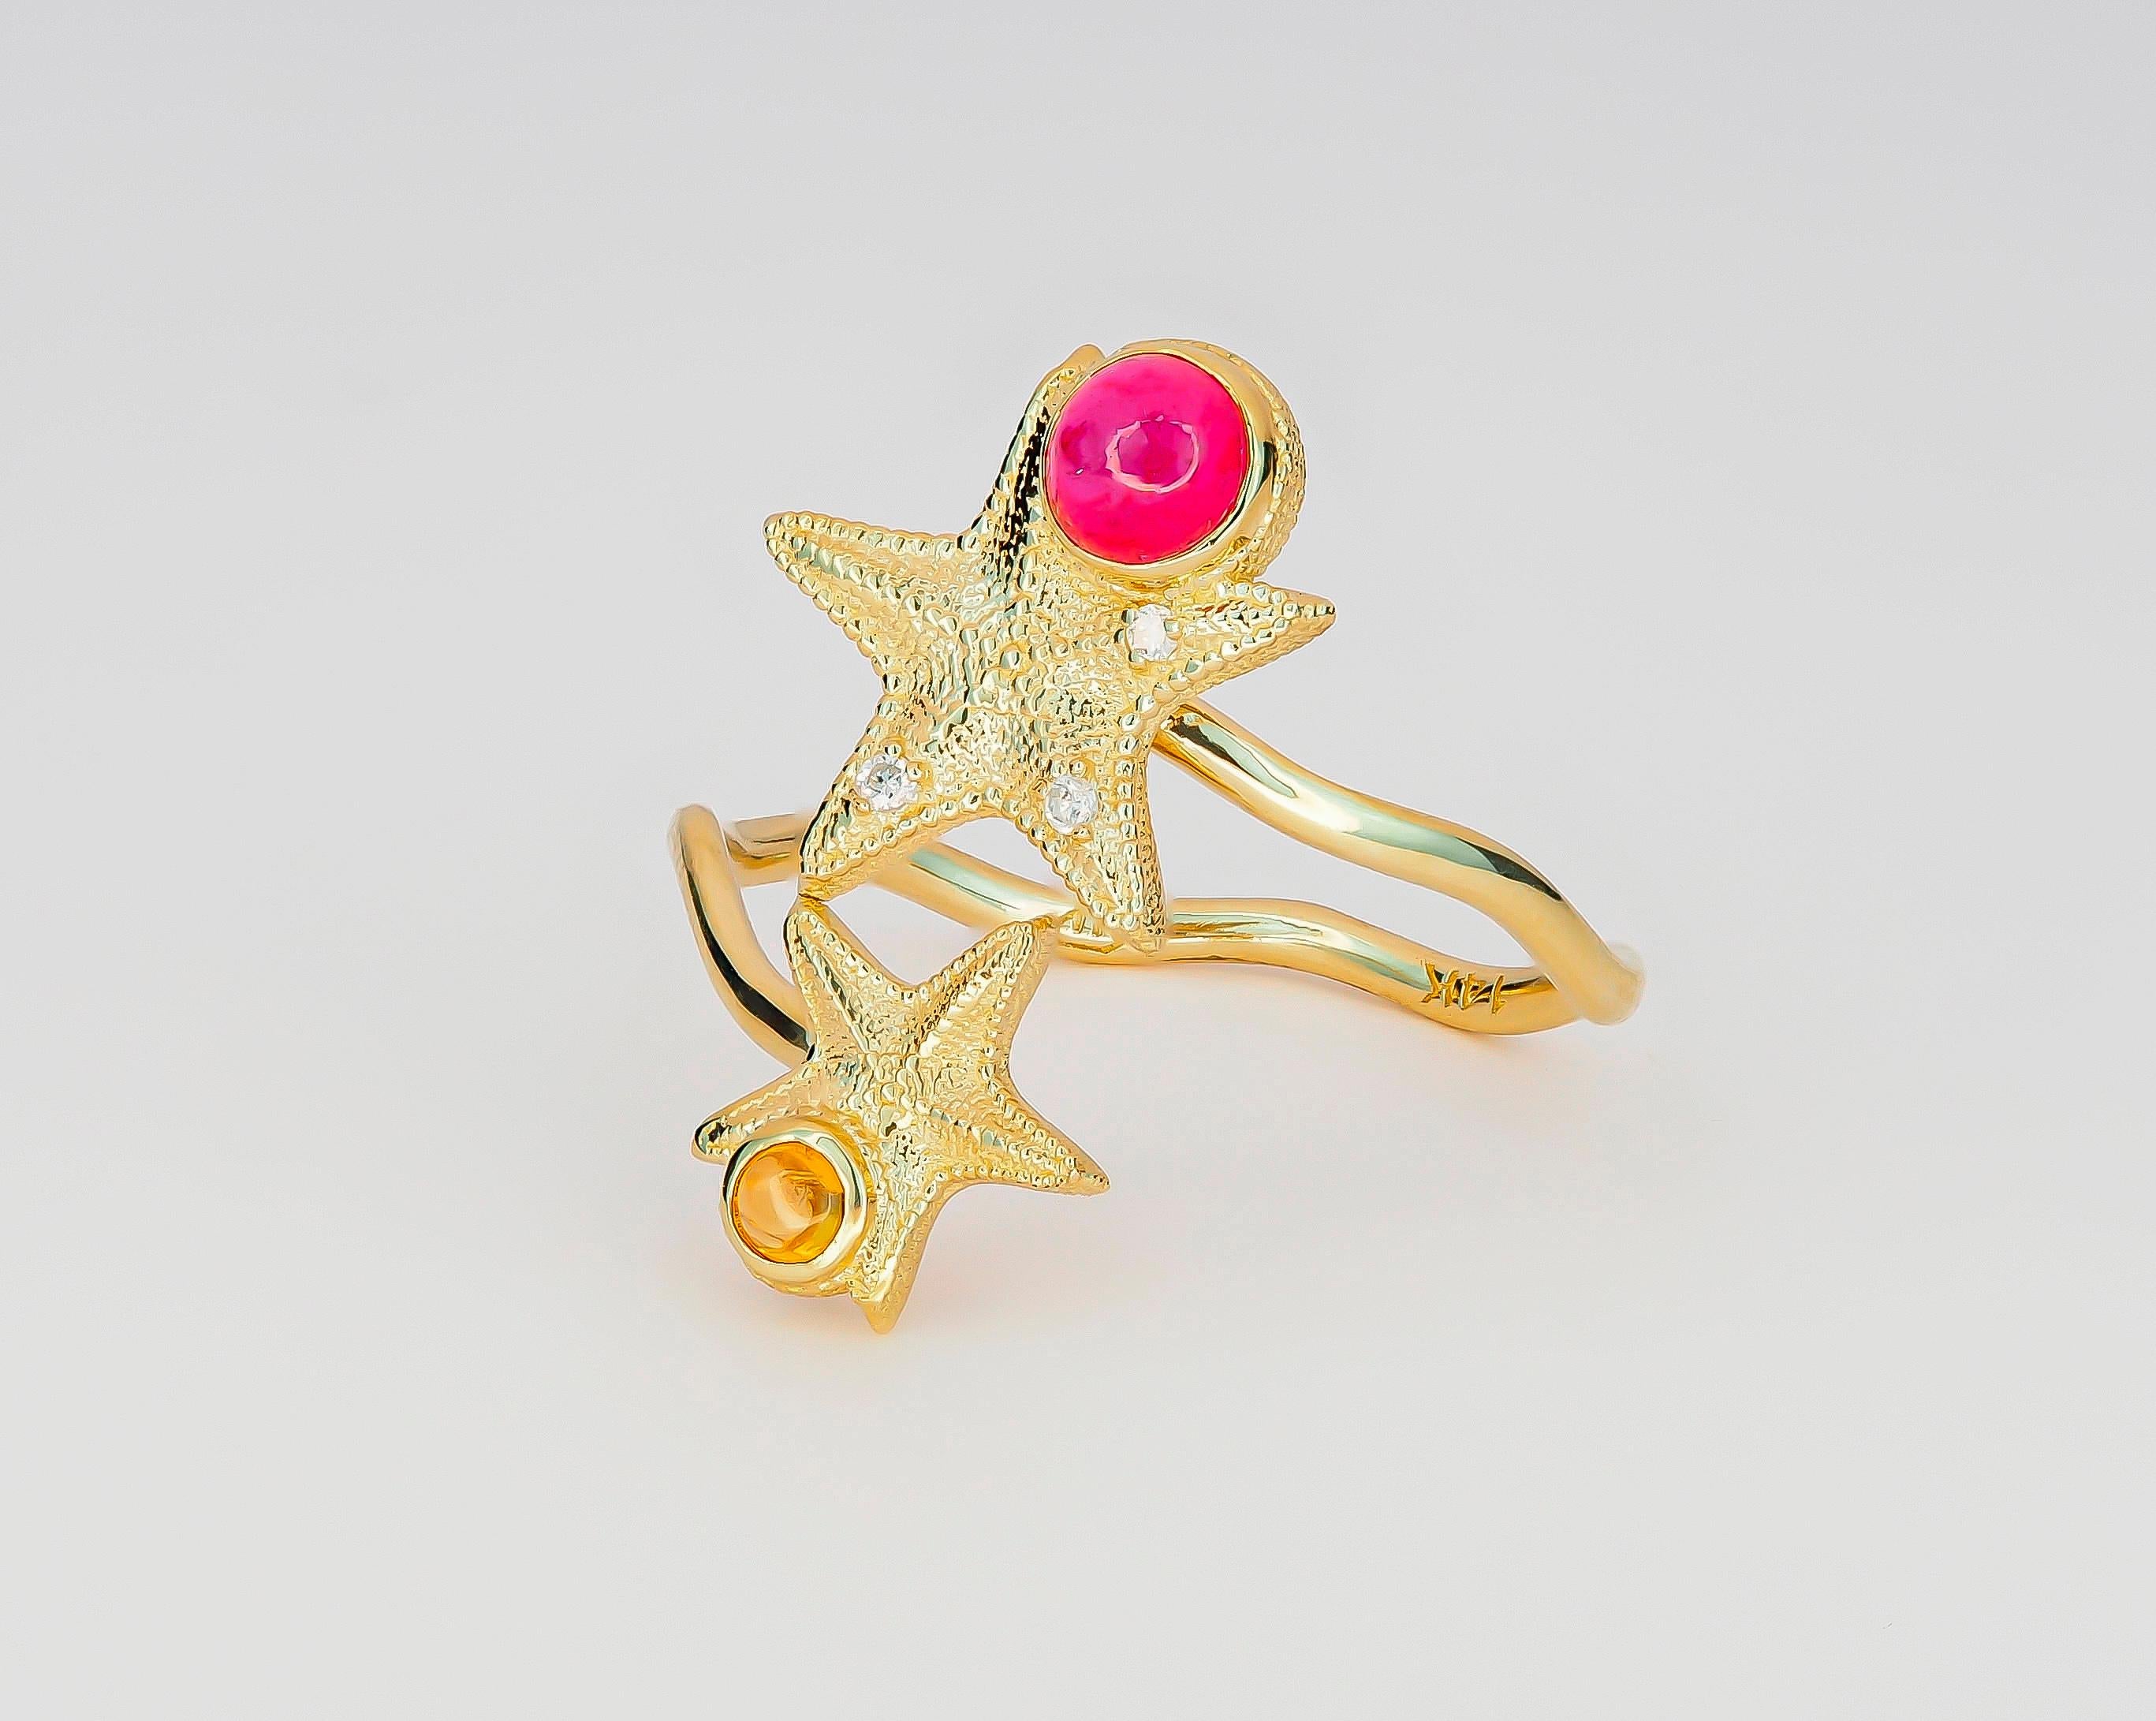 For Sale:   Ruby and Sapphire cabochon ring in 14 karat gold.  Star Fish Ring! 4